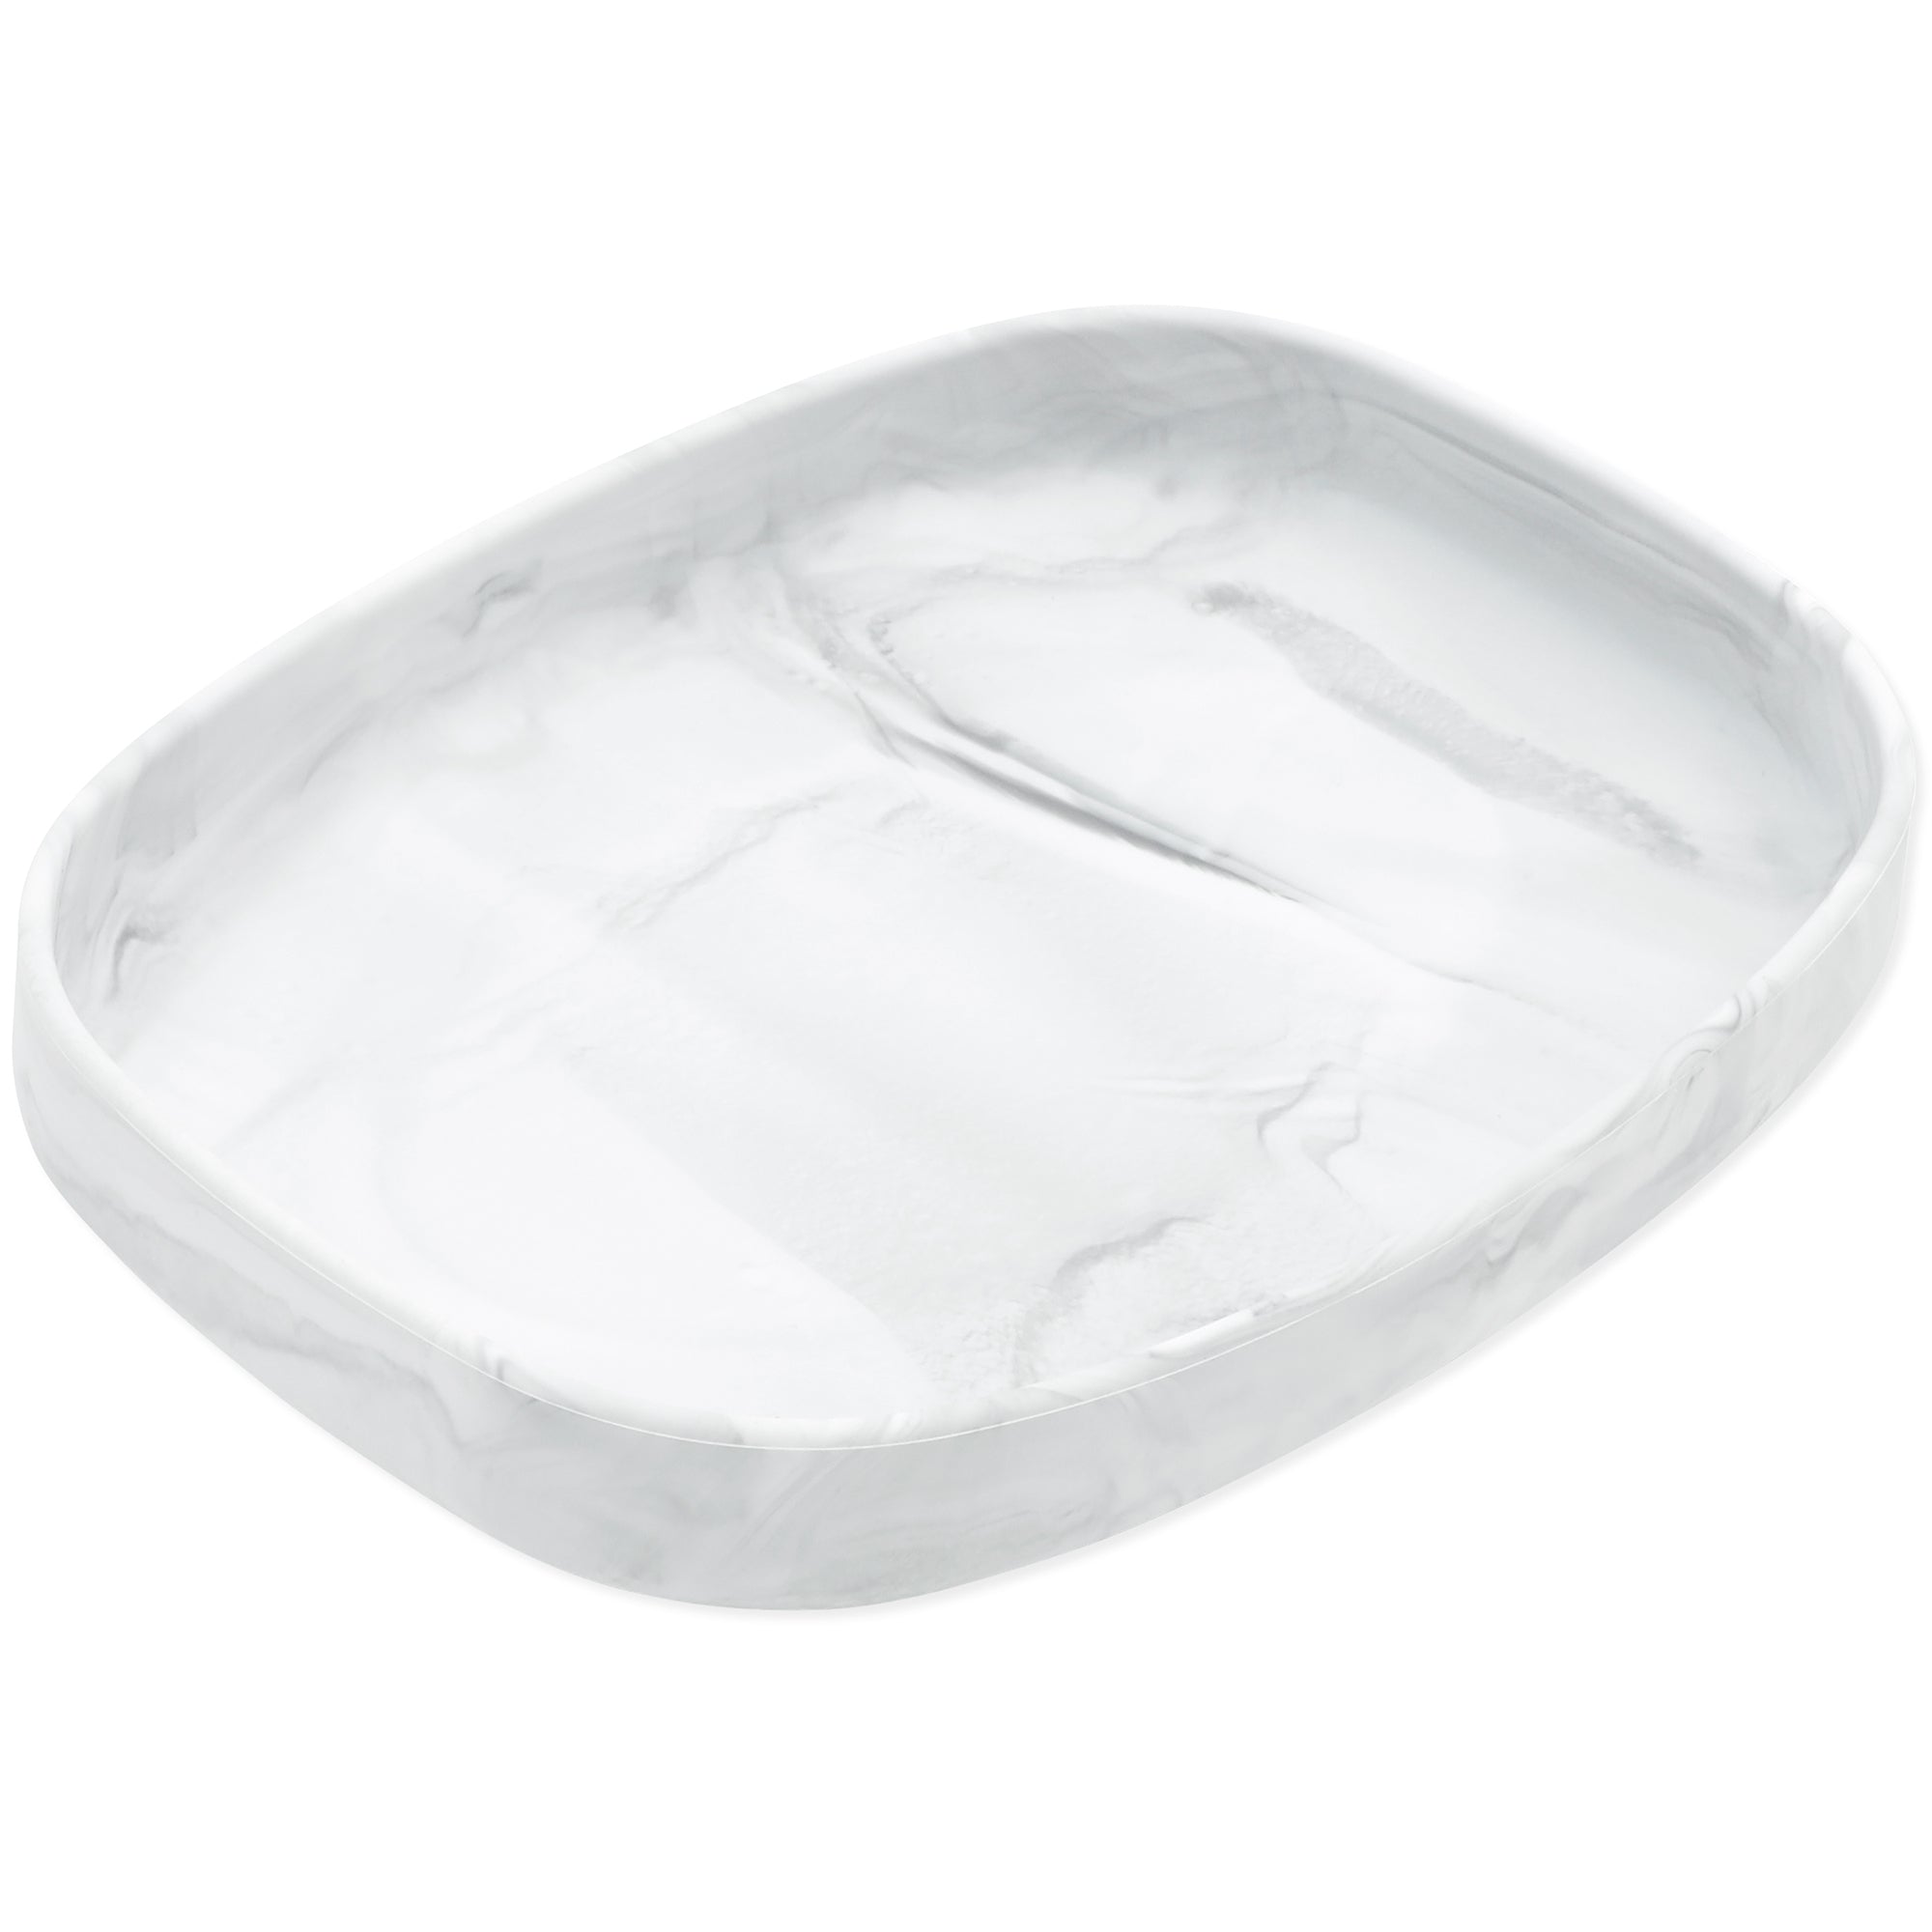 Silicone Grip Tray: Marble